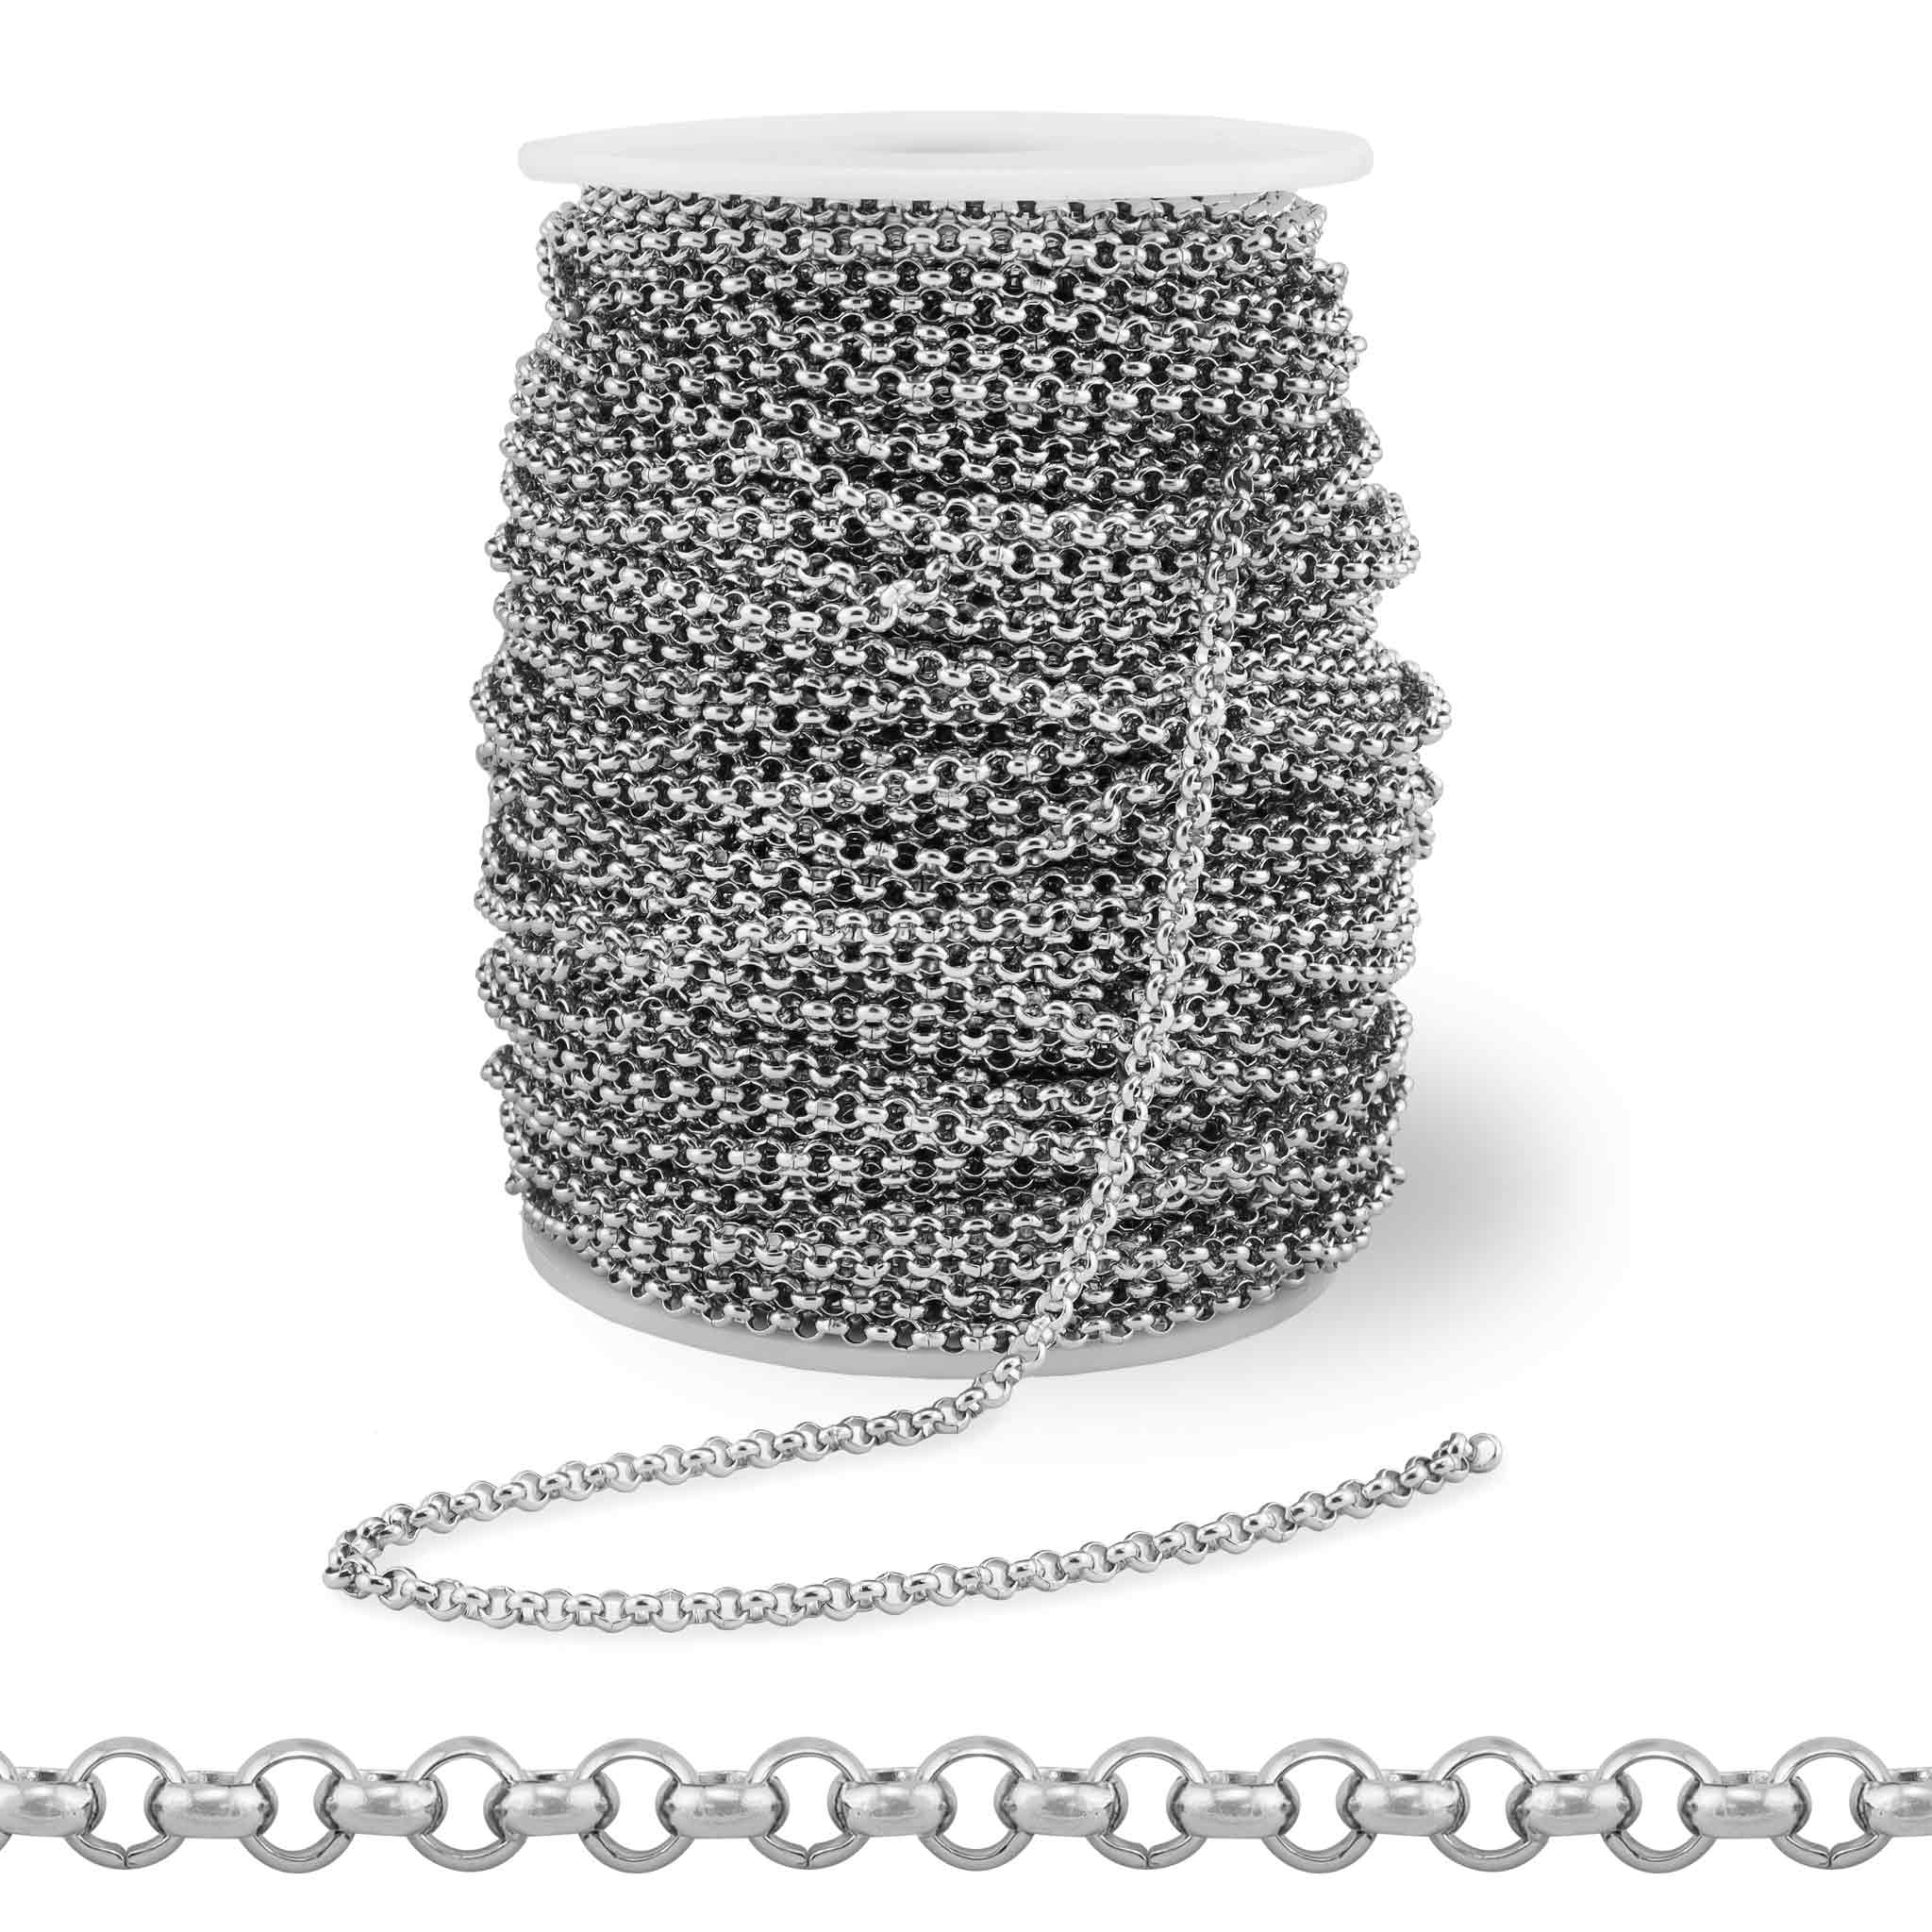 Stainless Steel 3mm Rolo Chain (unsoldered) 164' Spool\50 meter / SPL0001